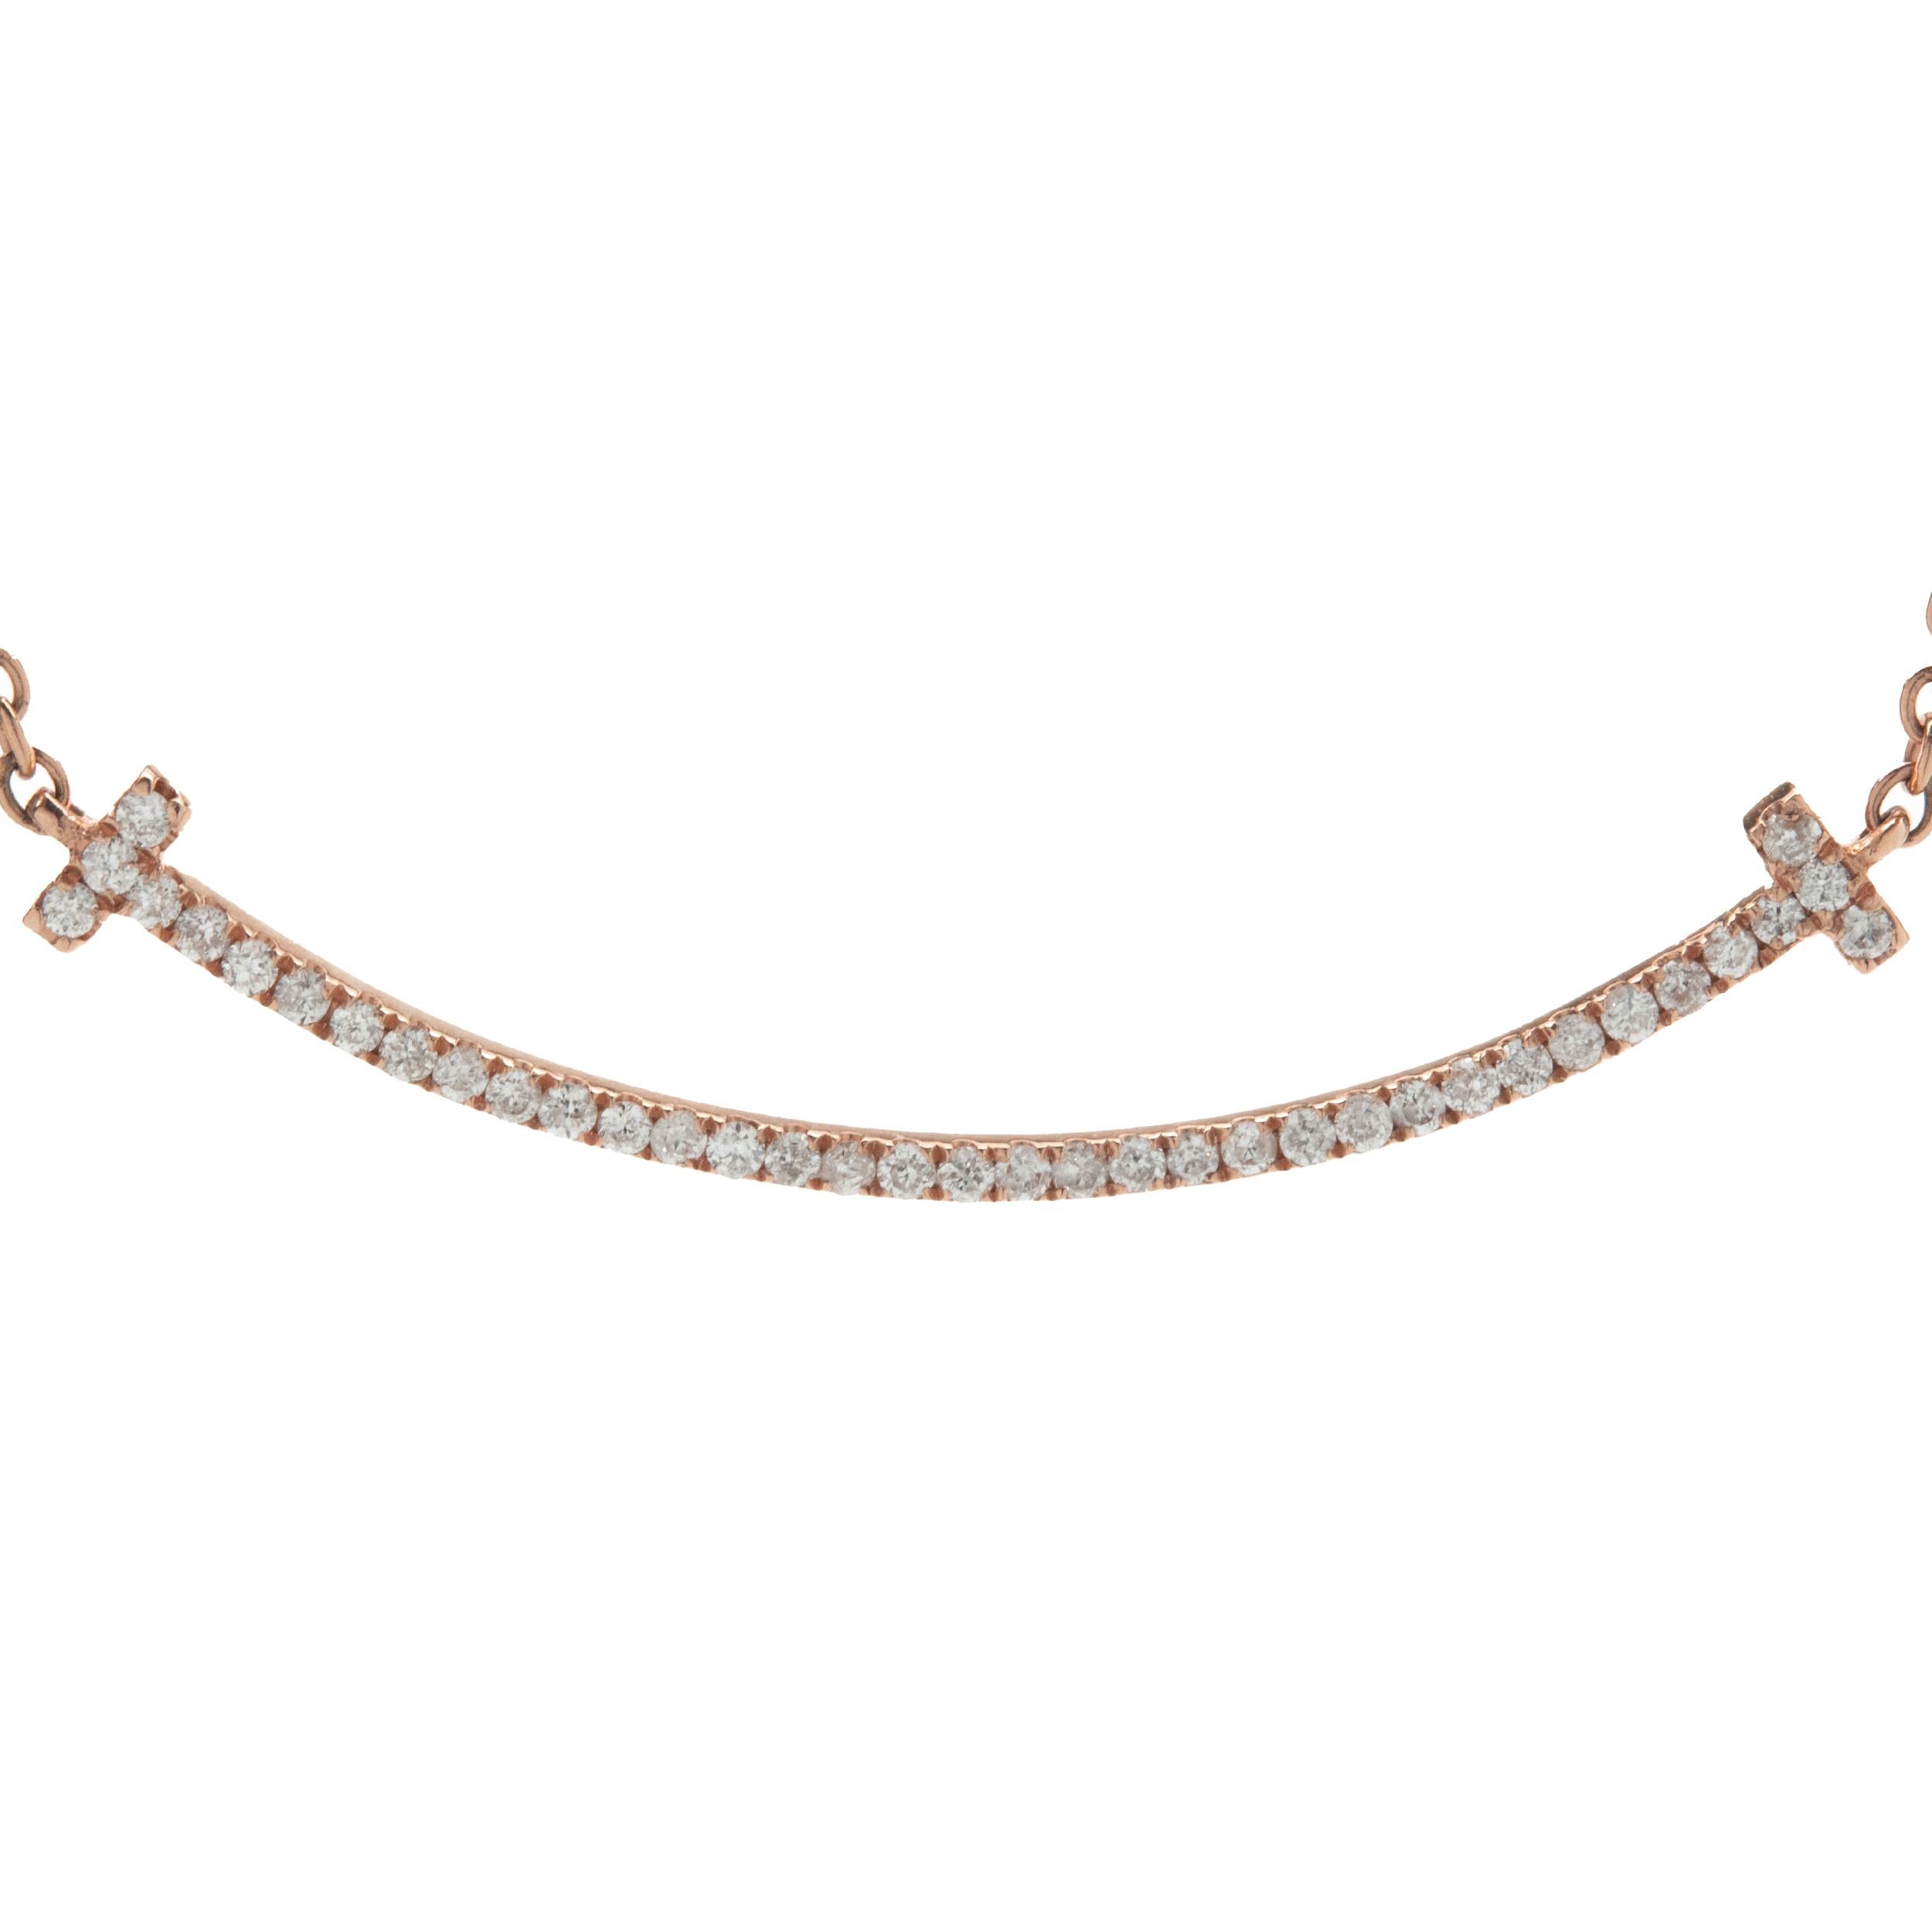 Designer: custom
Material: 18K rose gold
Diamonds: 38 round brilliant cut = .12cttw
Color: G
Clarity: VS1
Dimensions: necklace measures 18-inches in length 
Weight: 2.54 grams
